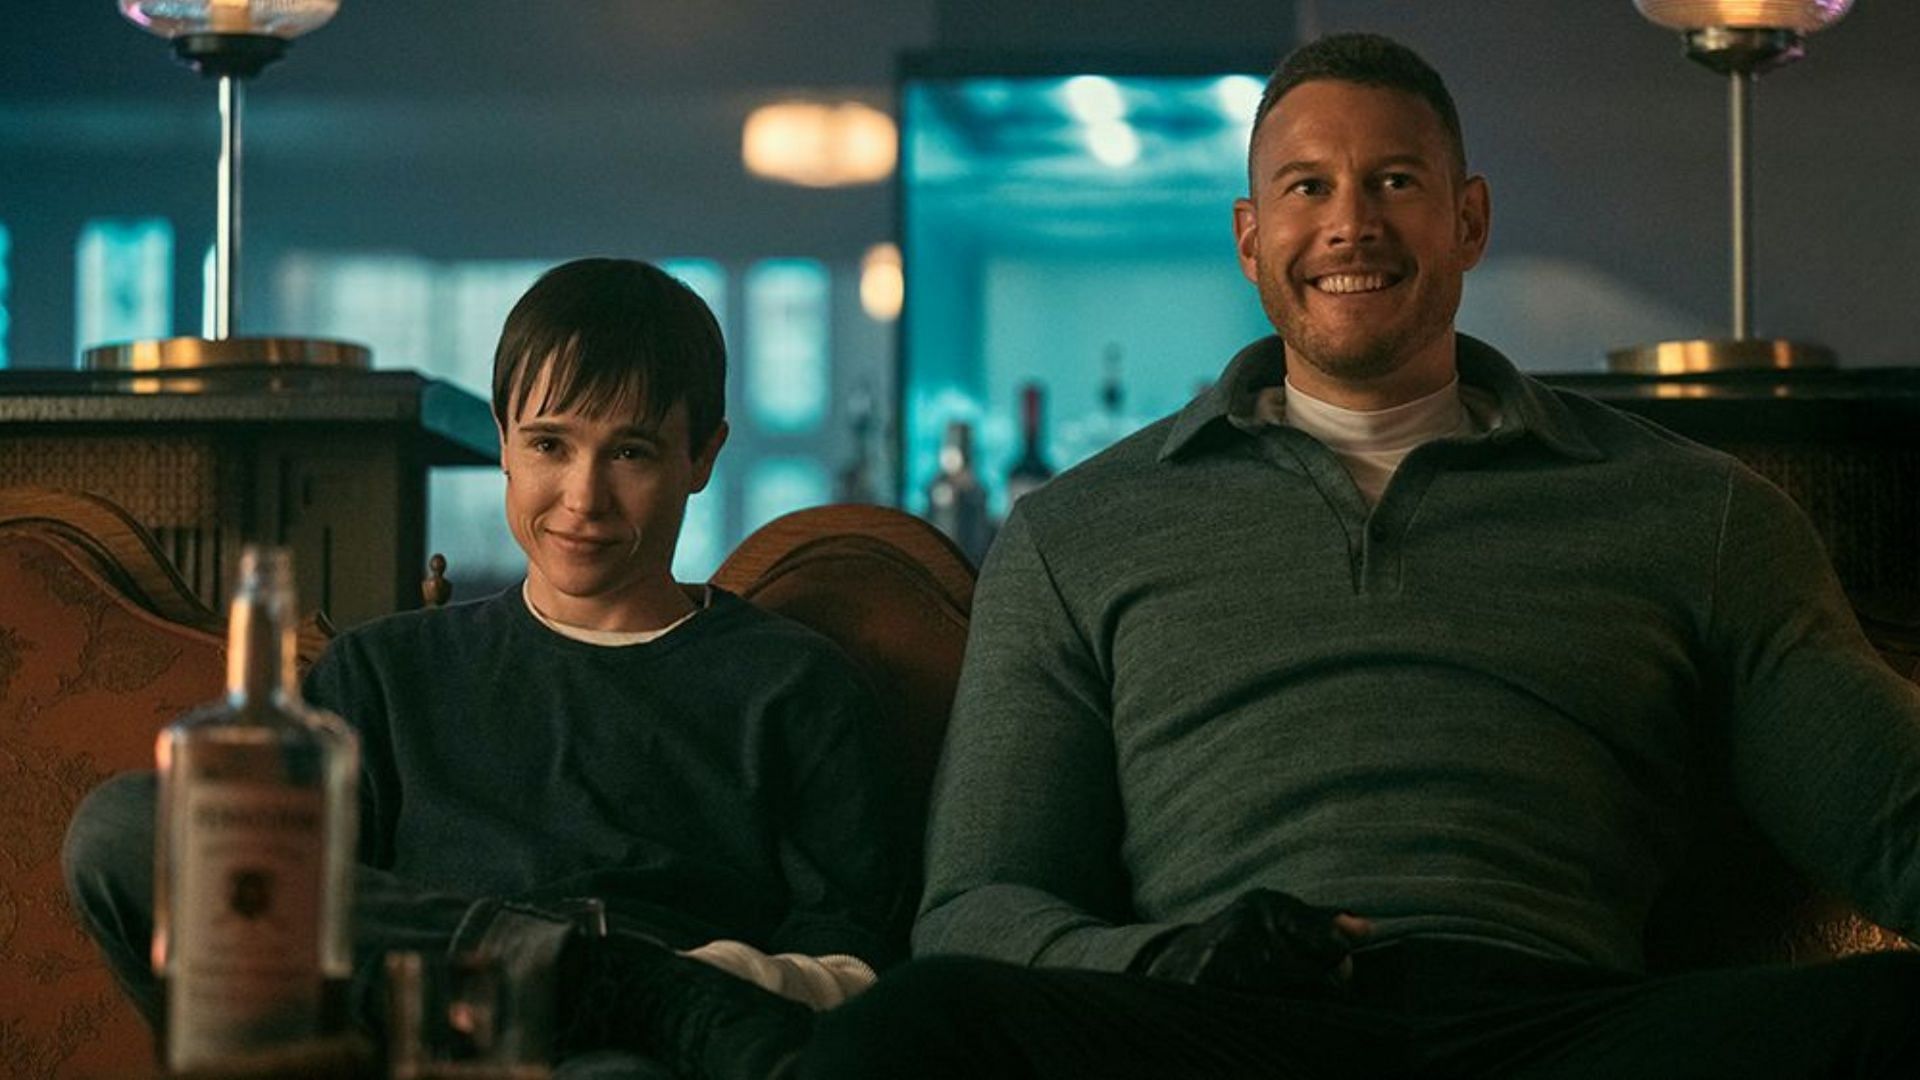 Viktor and Luther, as seen in The Umbrella Academy (Image via Netflix)